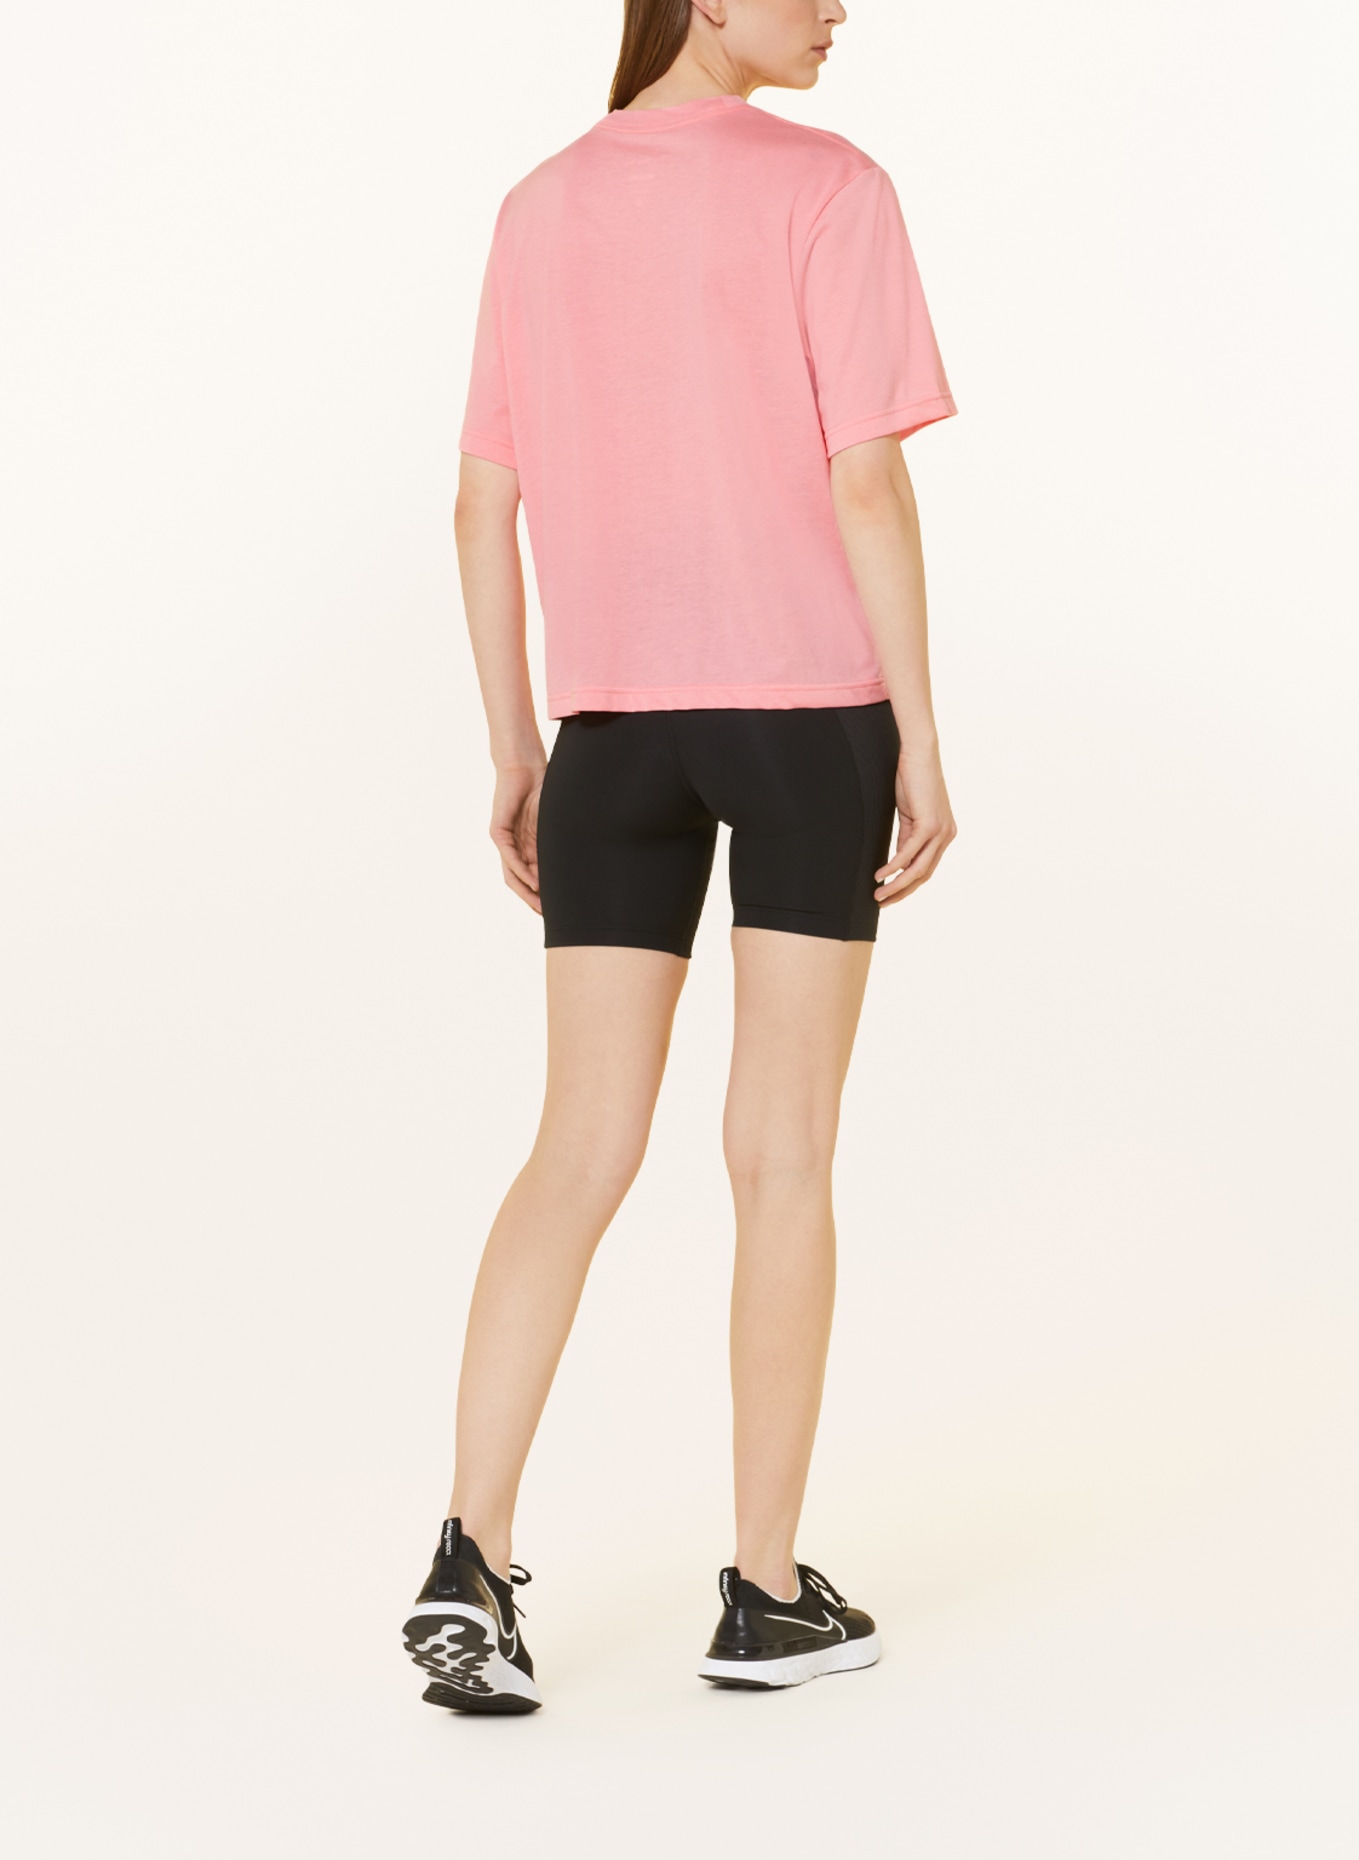 Nike Running shirt DRI-FIT TRAIL, Color: PINK (Image 3)